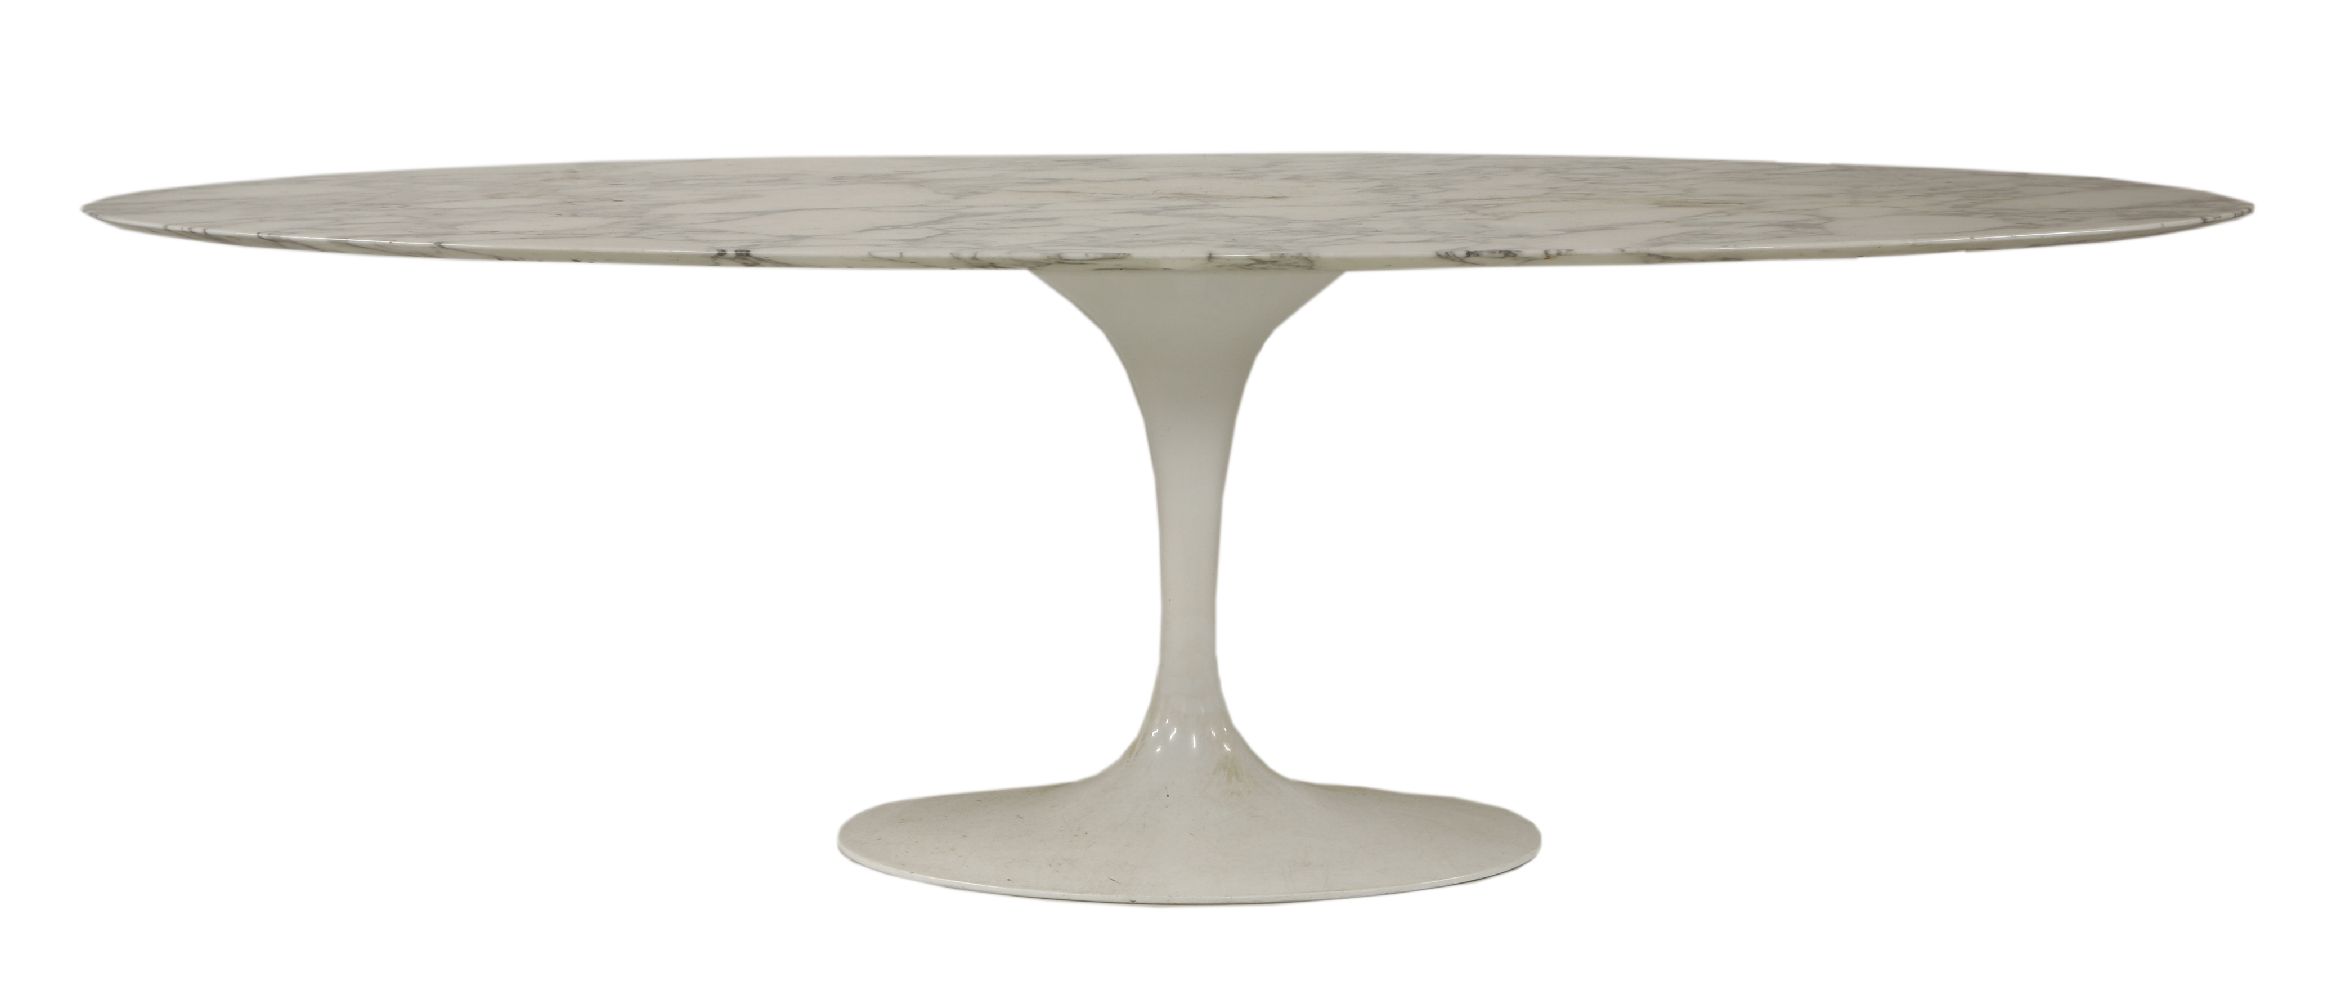 A 'Tulip' dining table,designed by Eero Saarinen, manufactured by Knoll International, the oval